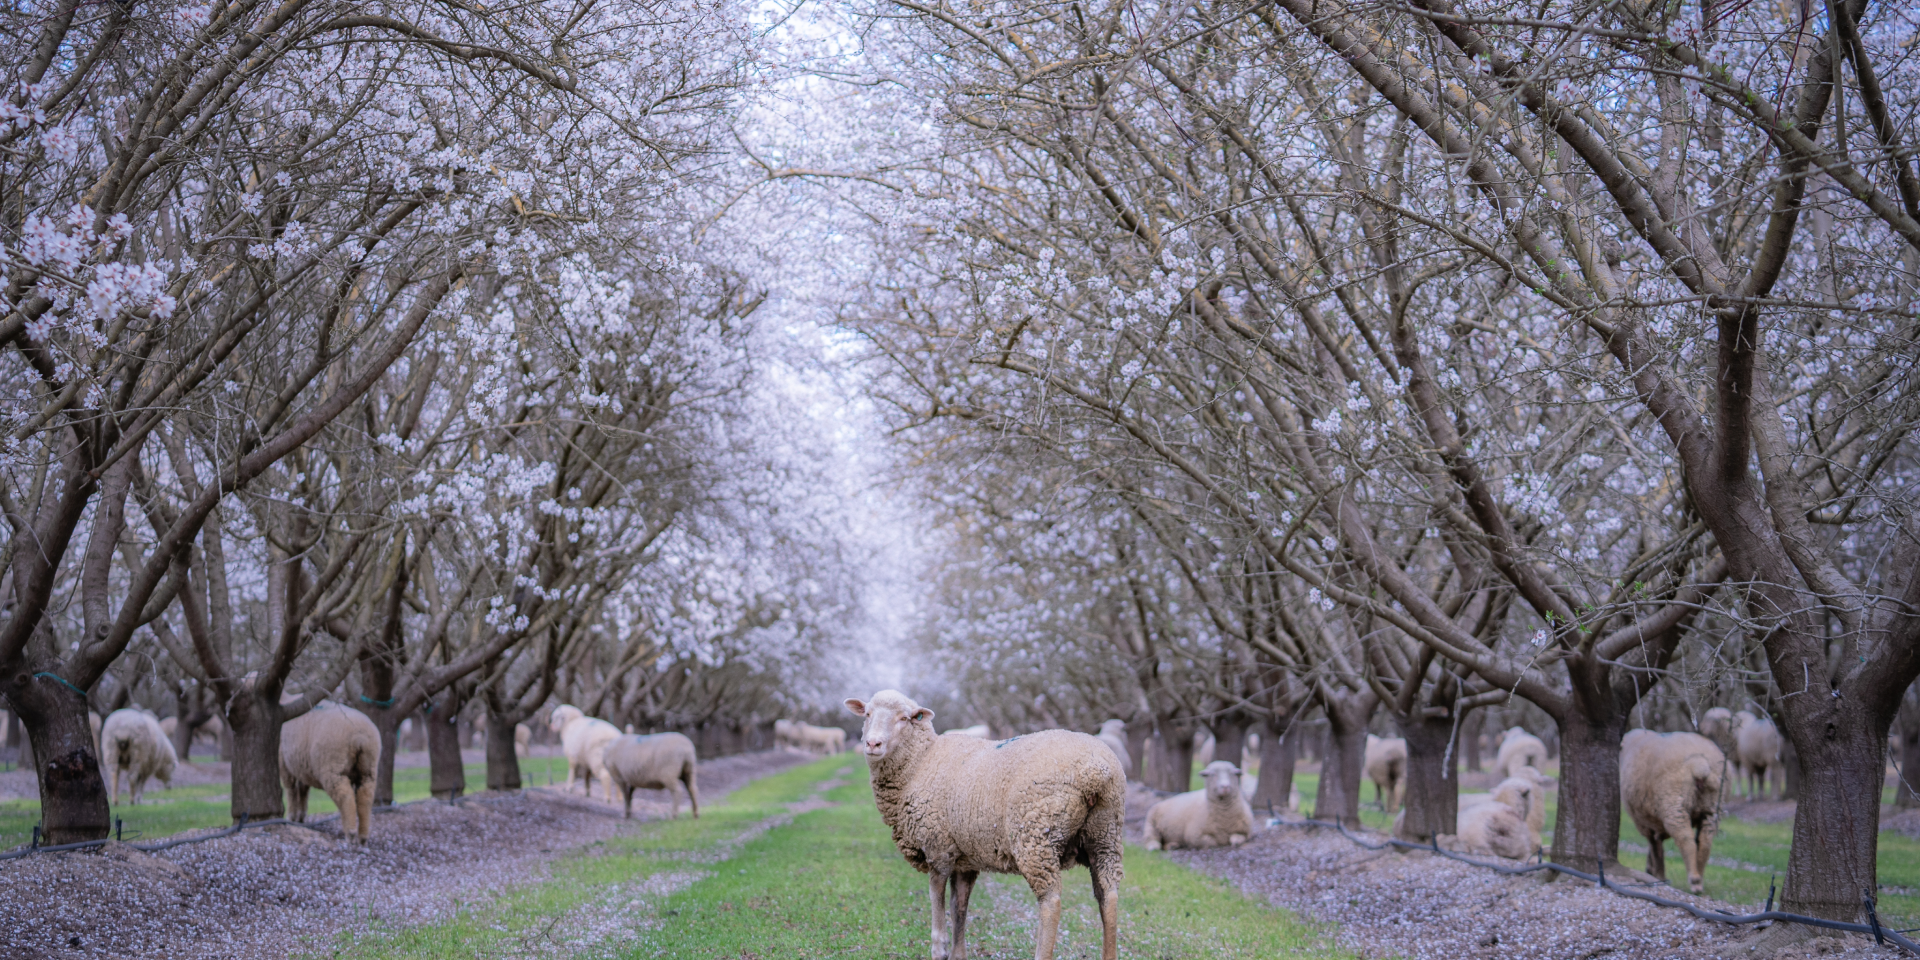 Sheep scattered in the almond orchard - The Almond Project